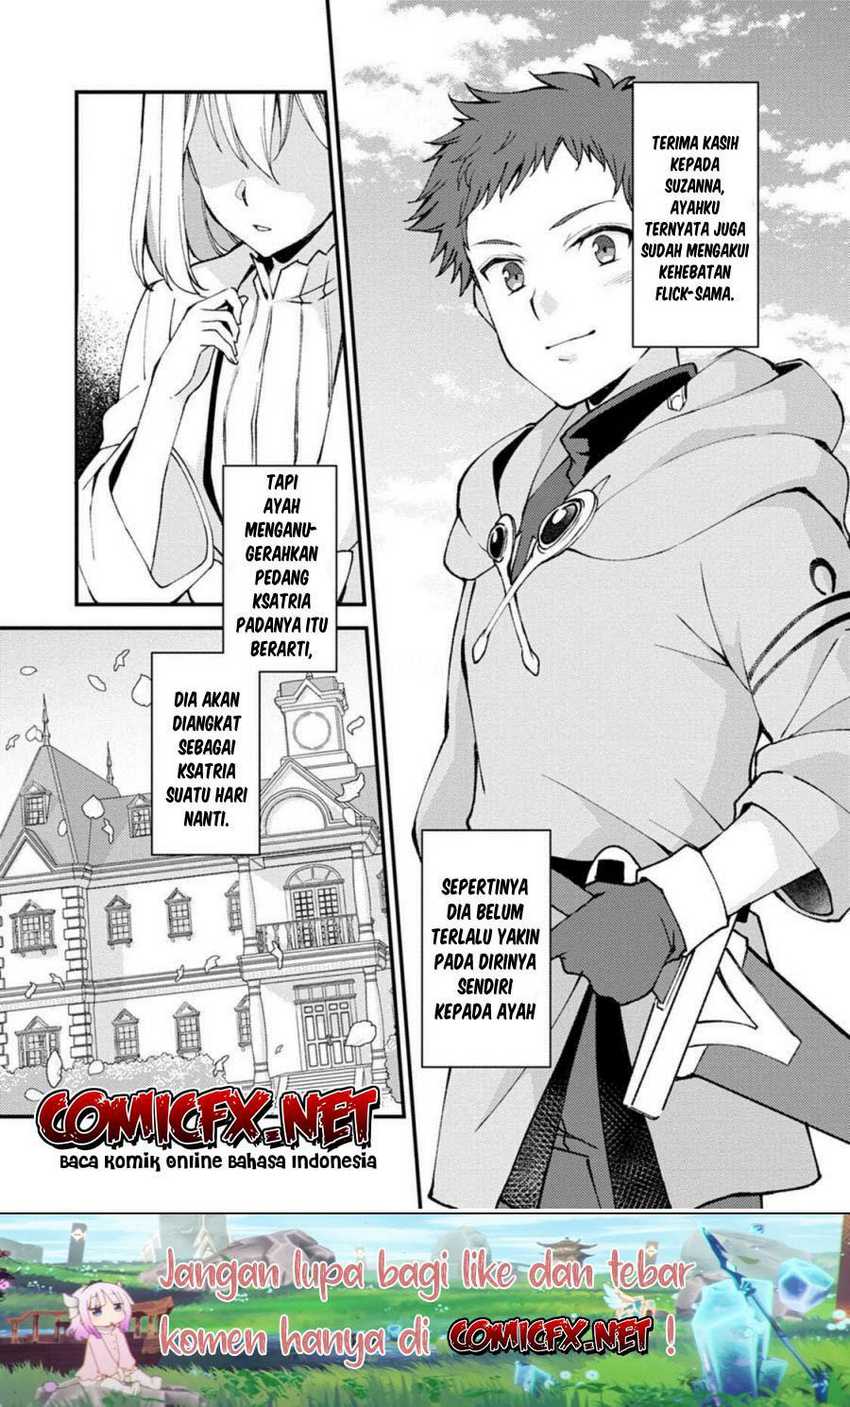 A Sword Master Childhood Friend Power Harassed Me Harshly, So I Broke off Our Relationship and Make a Fresh Start at the Frontier as a Magic Swordsman Chapter 08.2